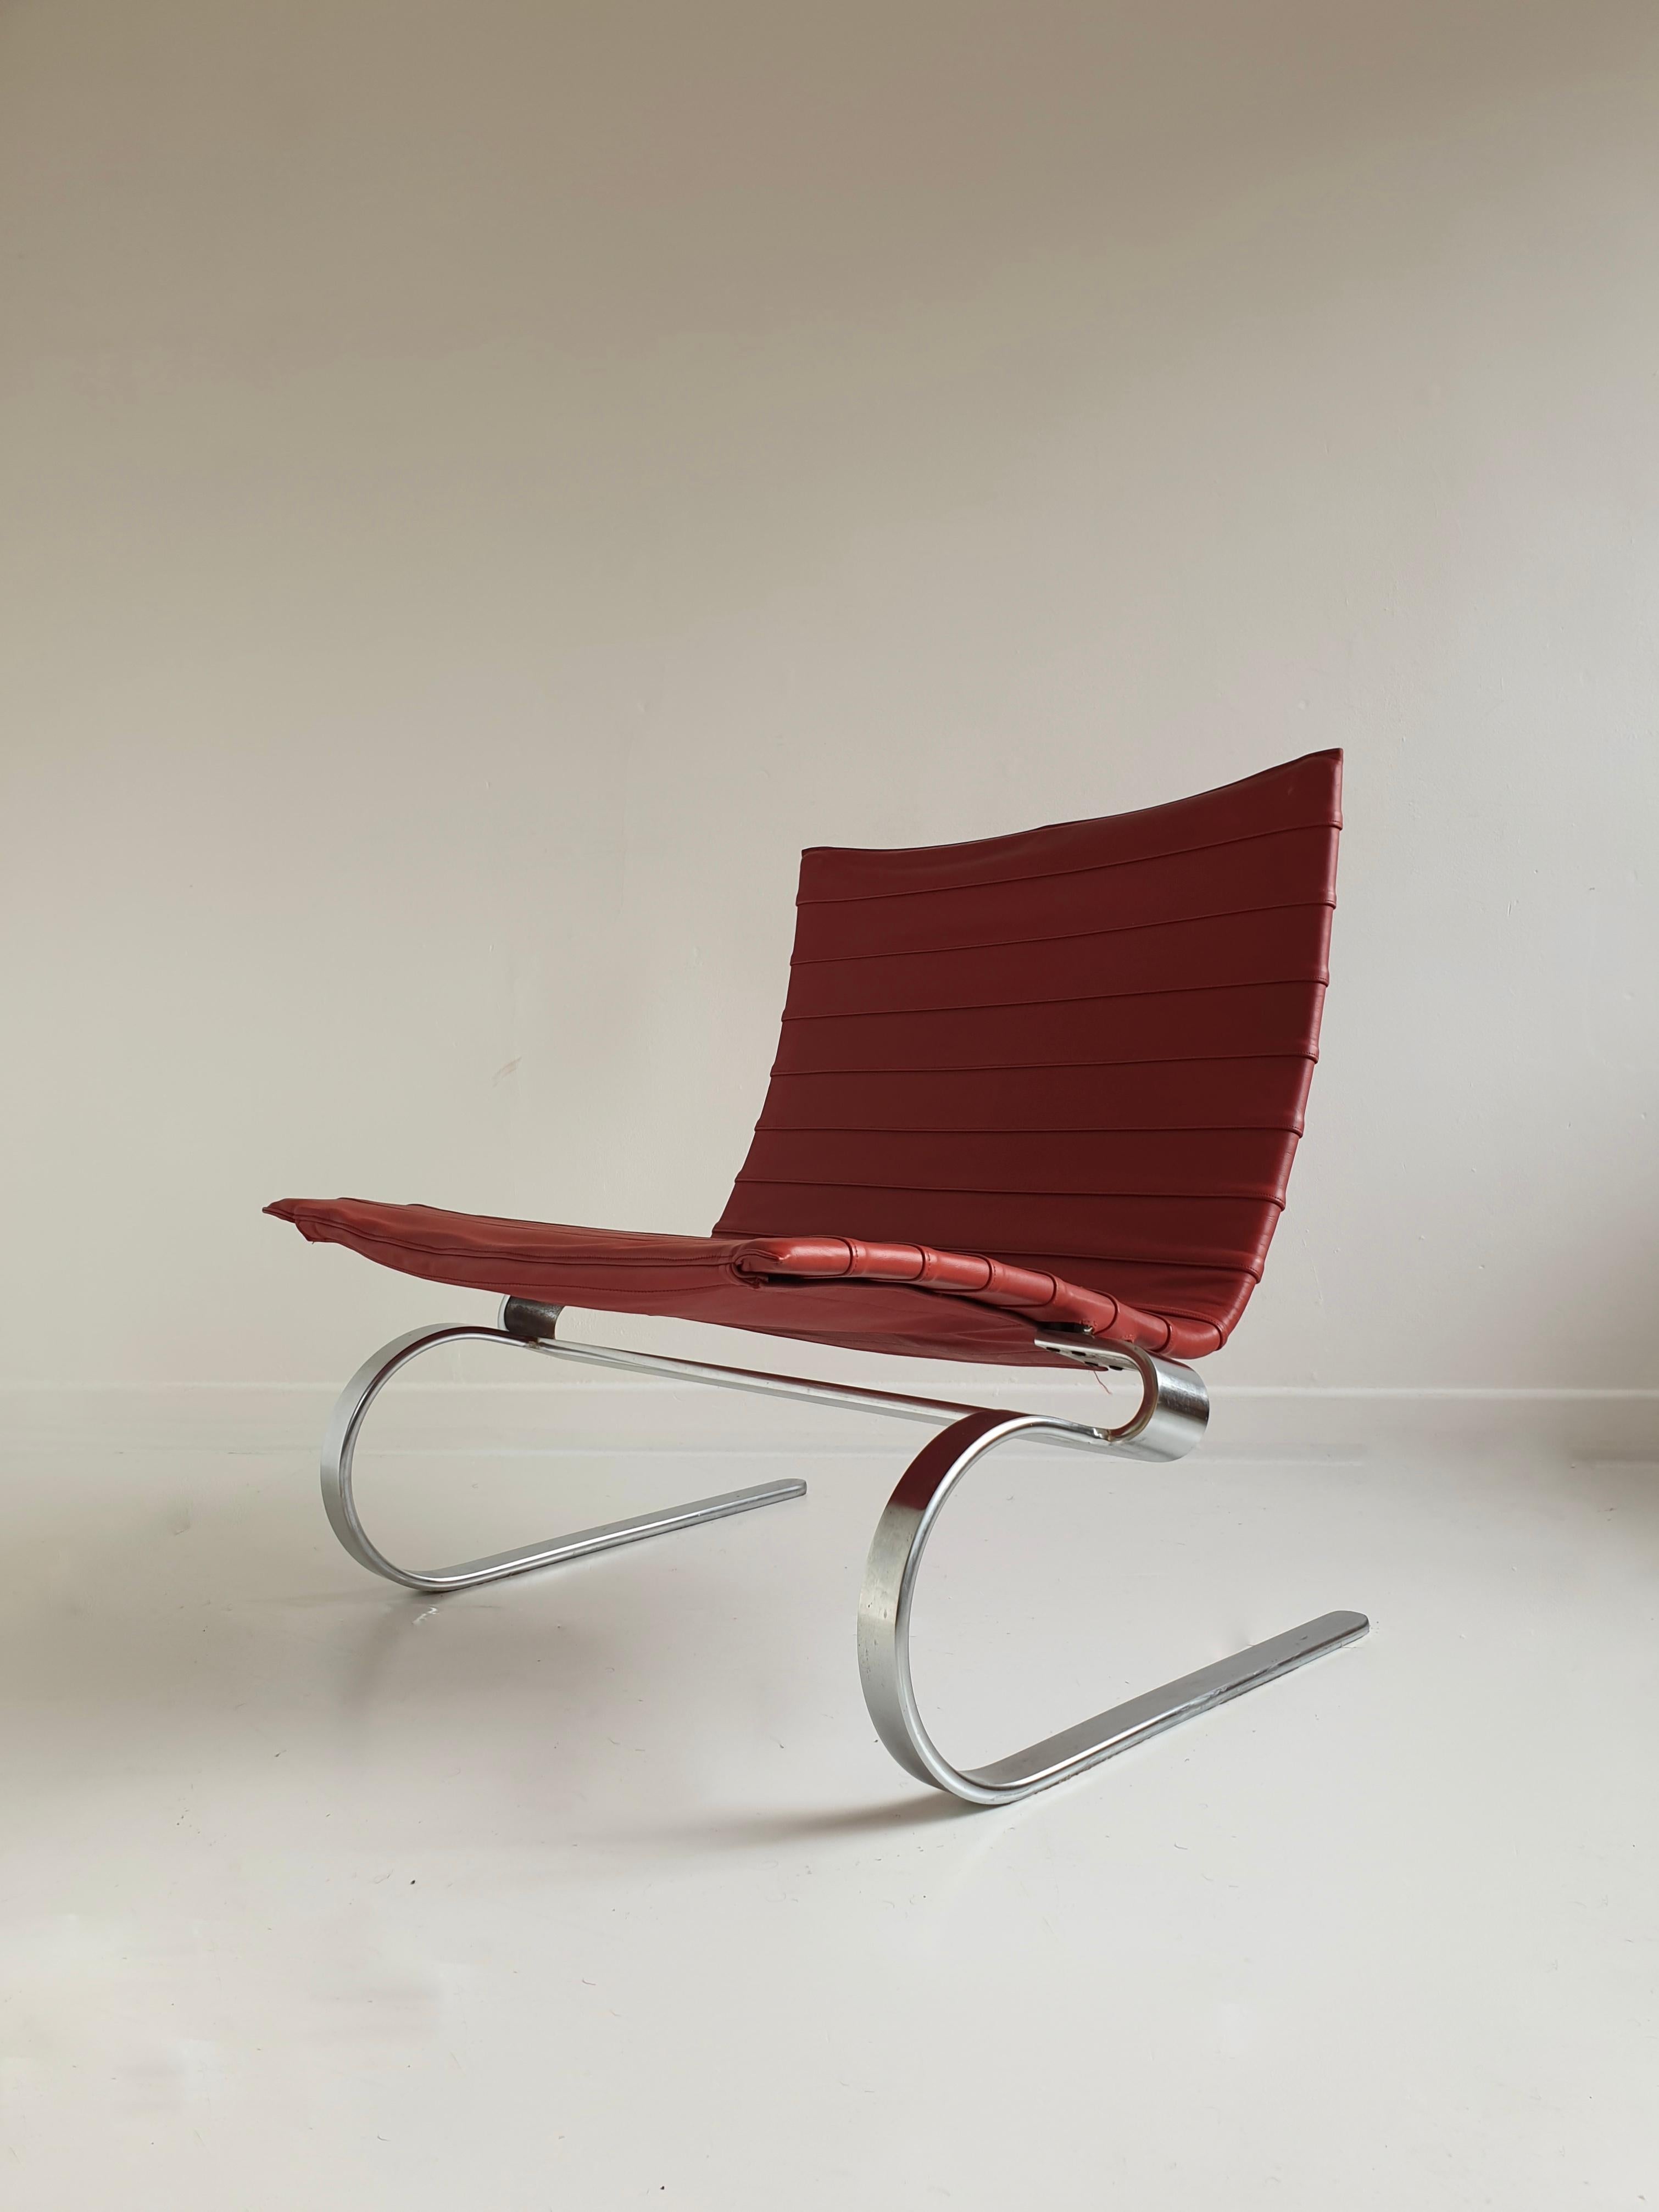 This is an early, low back model PK20 lounge chair designed by Danish icon Poul Kjaerholm for E. Kold Christensen in the 1960s. Never reproduced, like the more common high back version, this is a rare item with the Kjaerholm stamp of